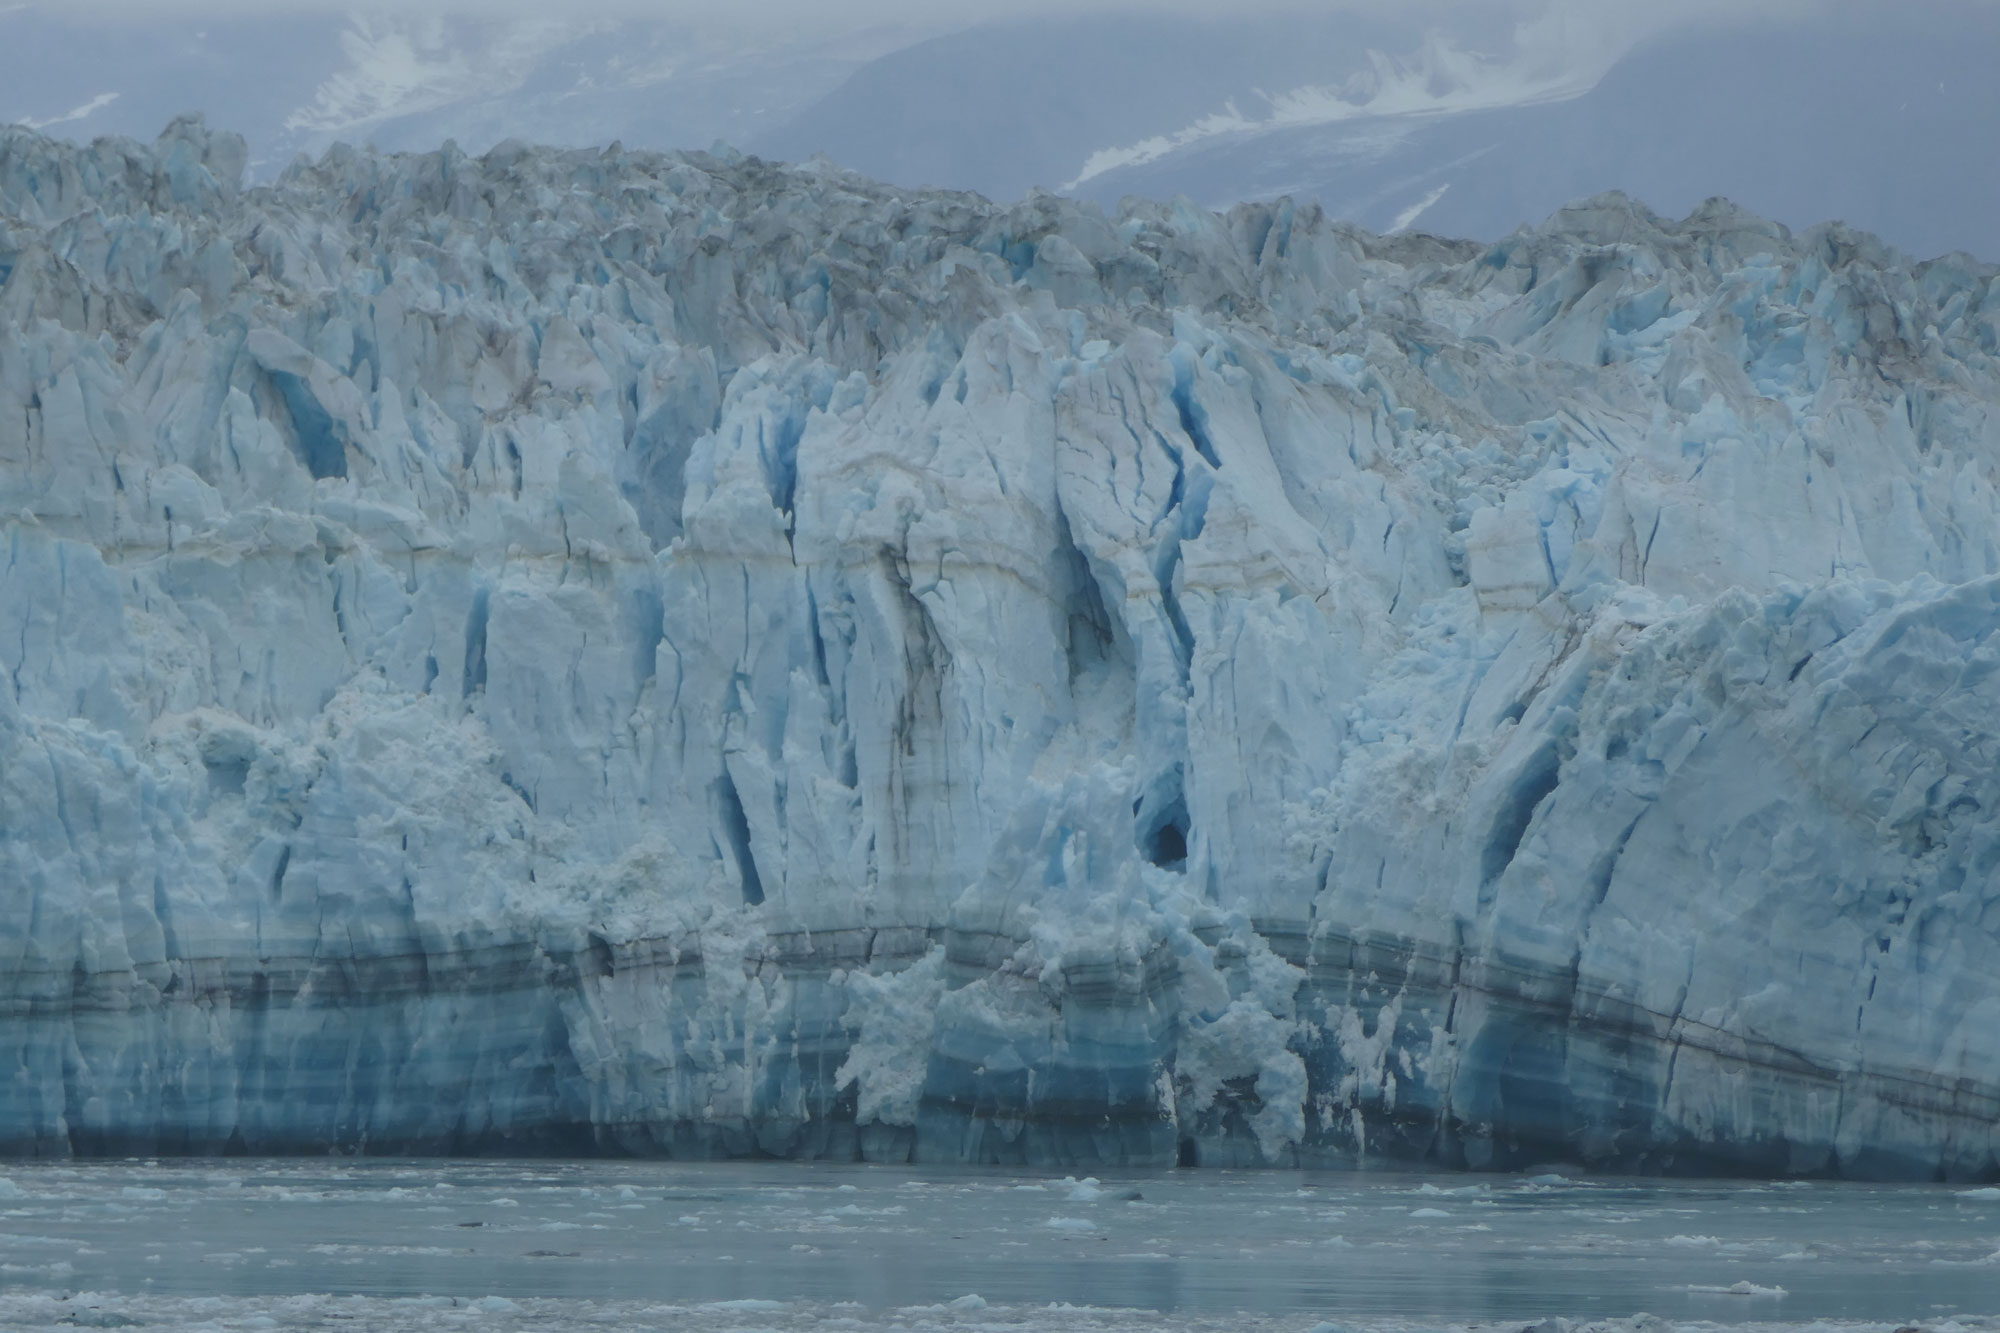 Photograph of Hubbard Glacier in Alaska showing chunks of ice calving into the ocean.